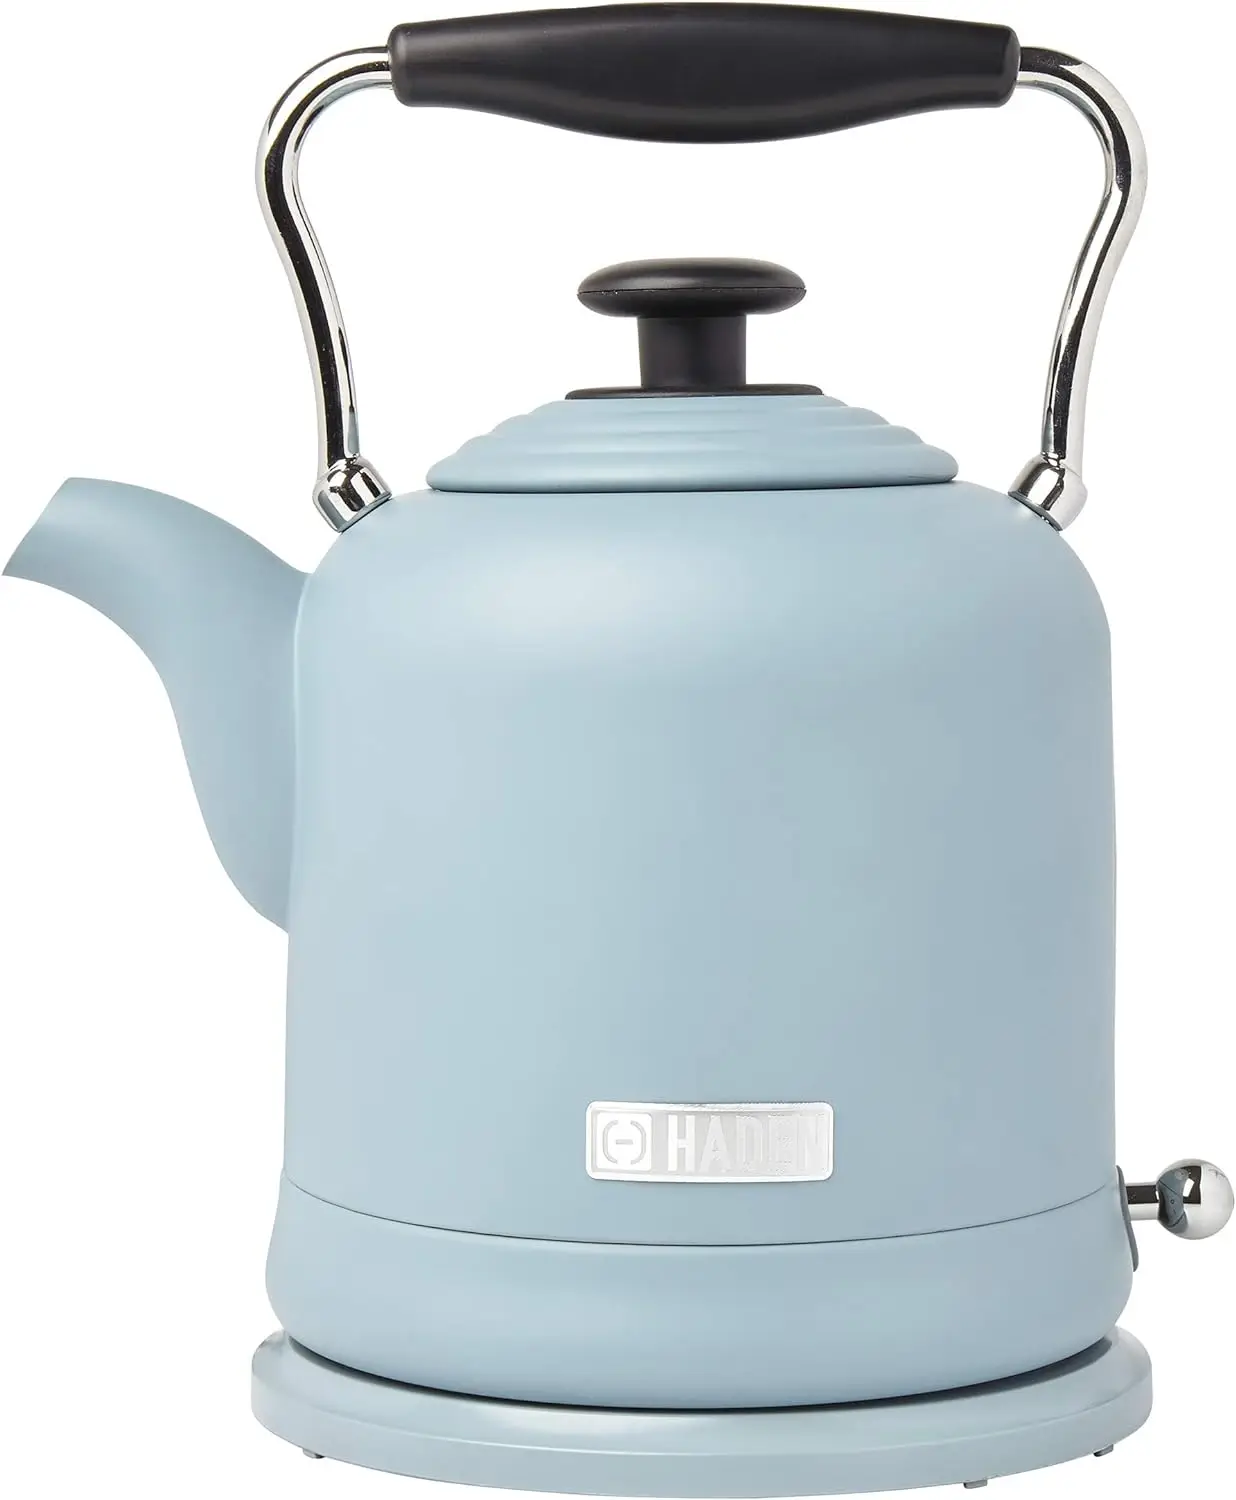 

HIGHCLERE Vintage Retro 1.5 Liter/6 Cup Capacity Innovative Cordless Stainless Steel Tea Pot Kettle with 360 Degree Base, Pool